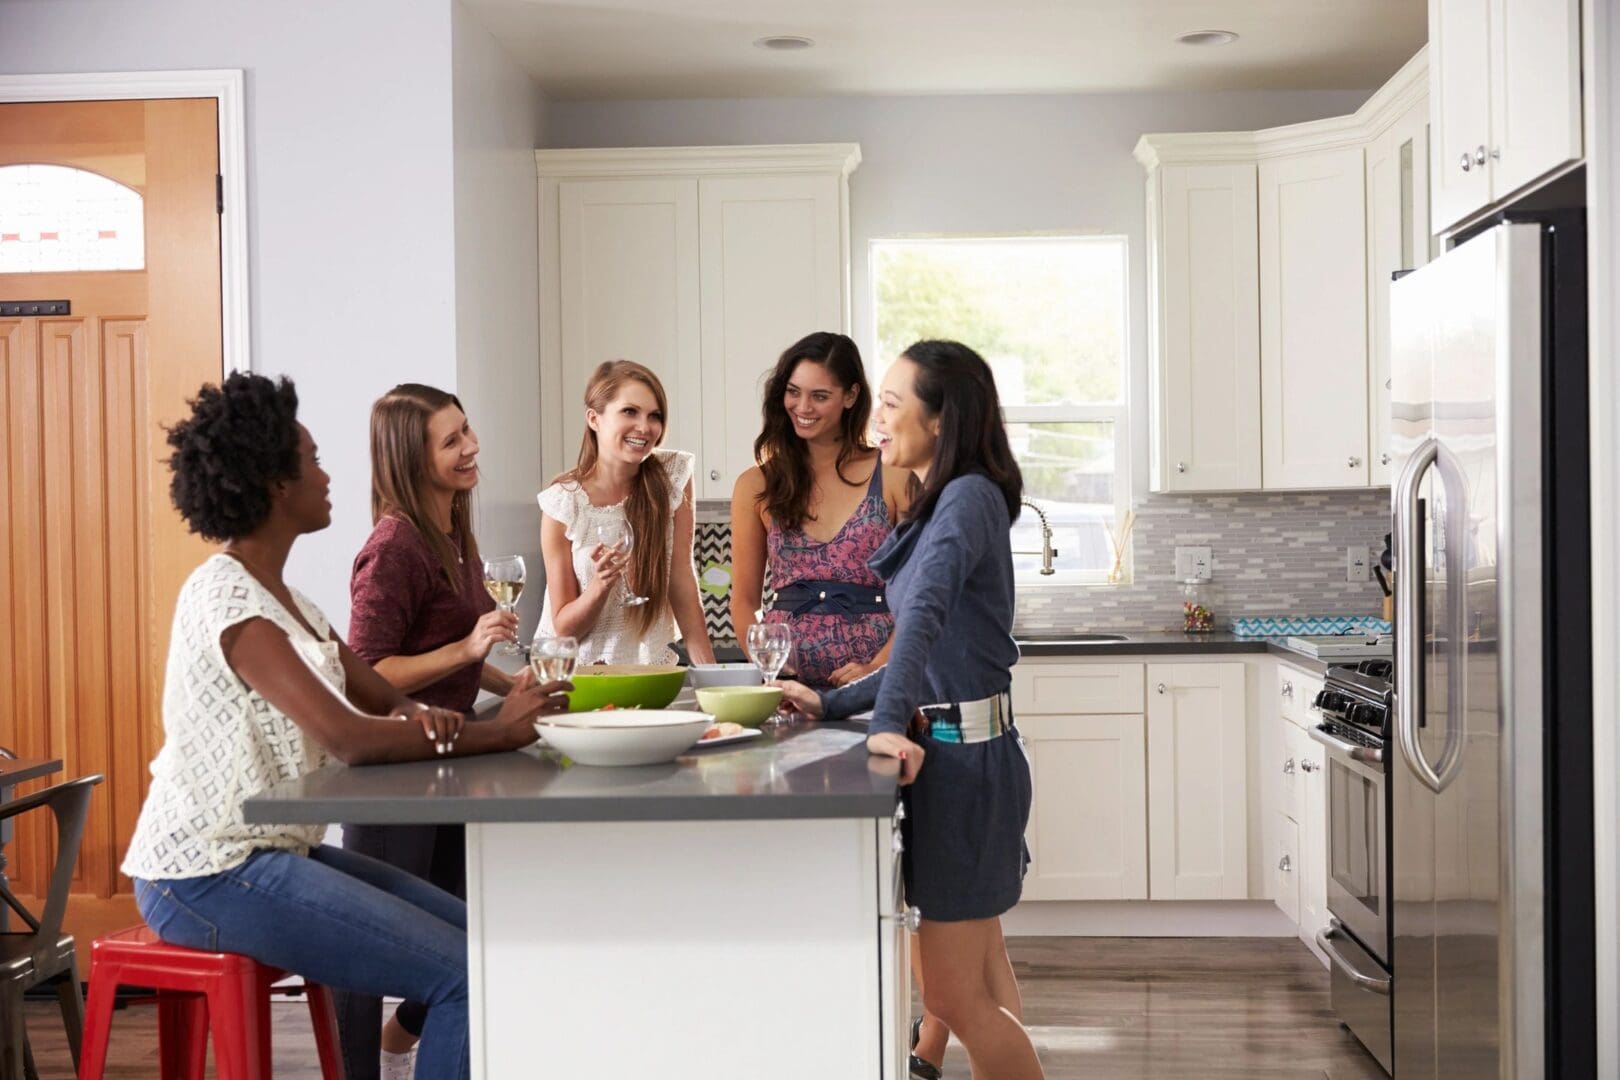 A group of people in the kitchen talking to each other.